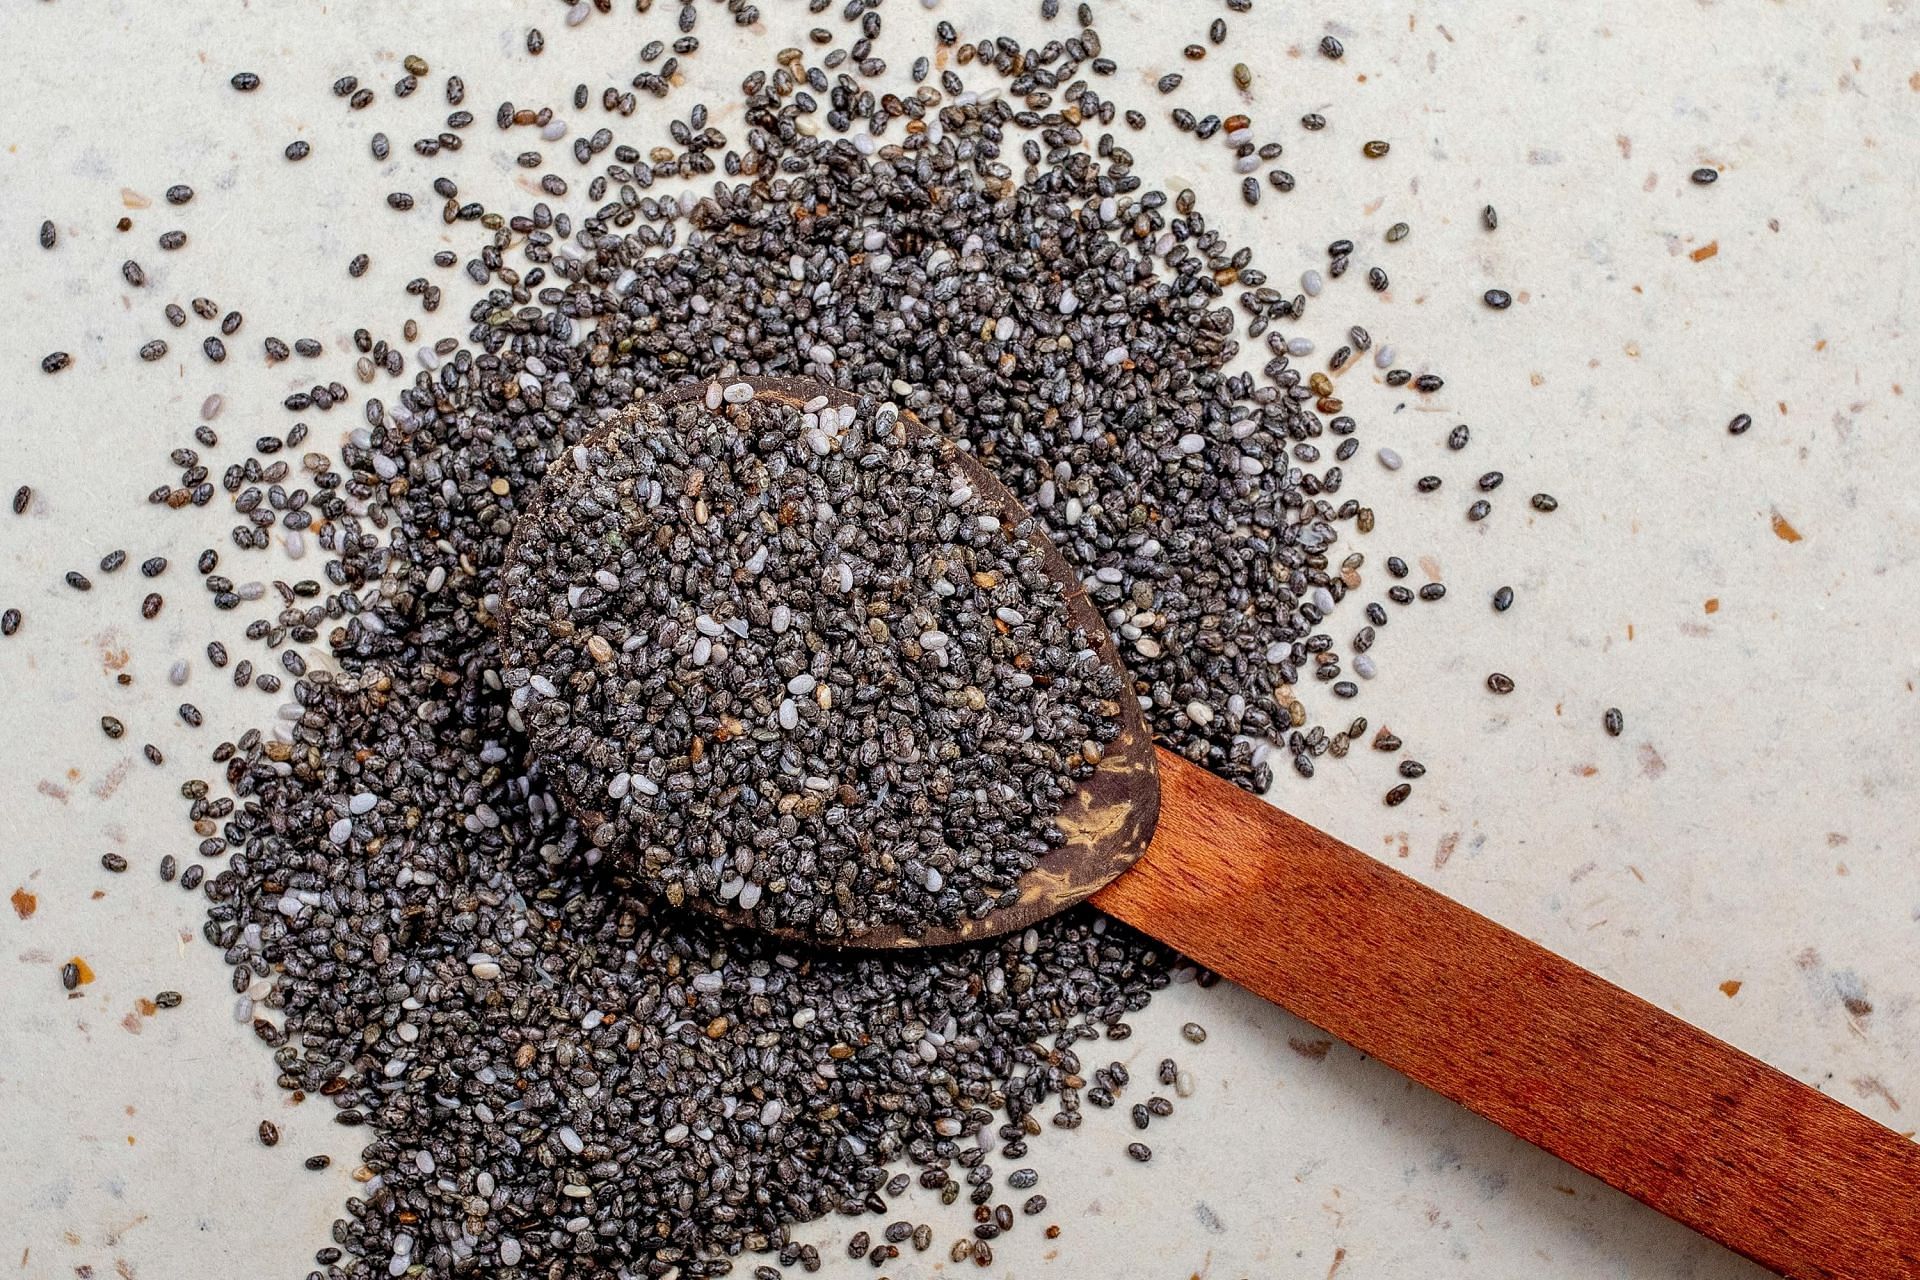 Importance of Chia seeds vs flax seeds (image sourced via Pexels / Photo by jubair)